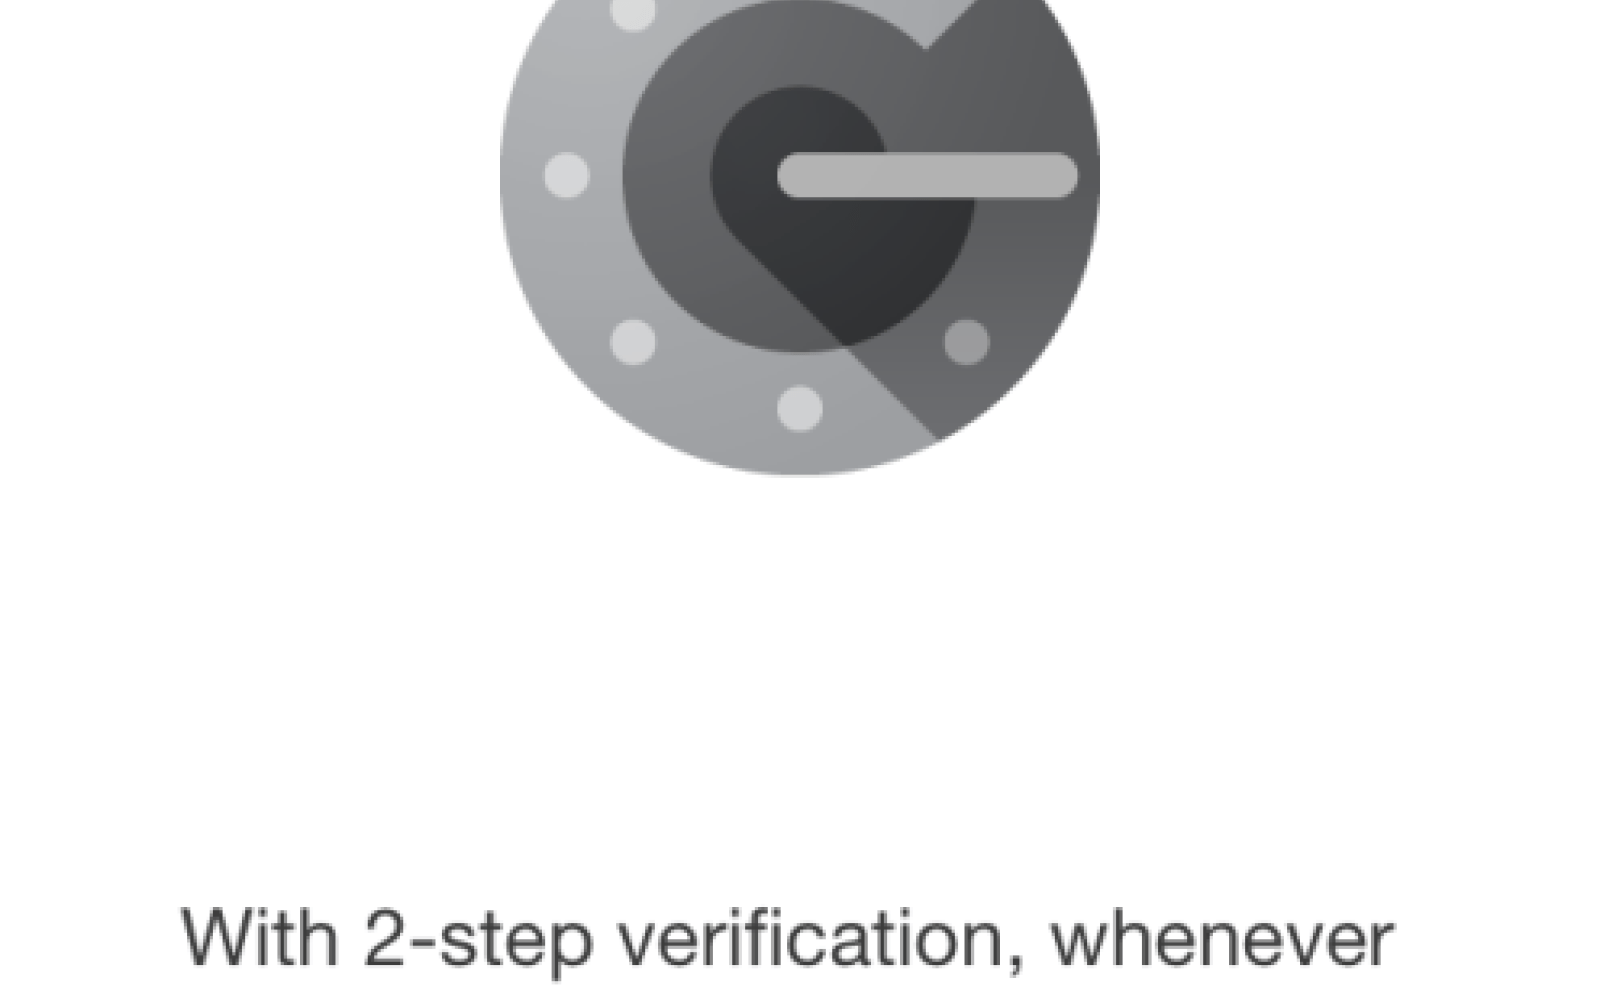 How To Download Google Authenticator On Mac